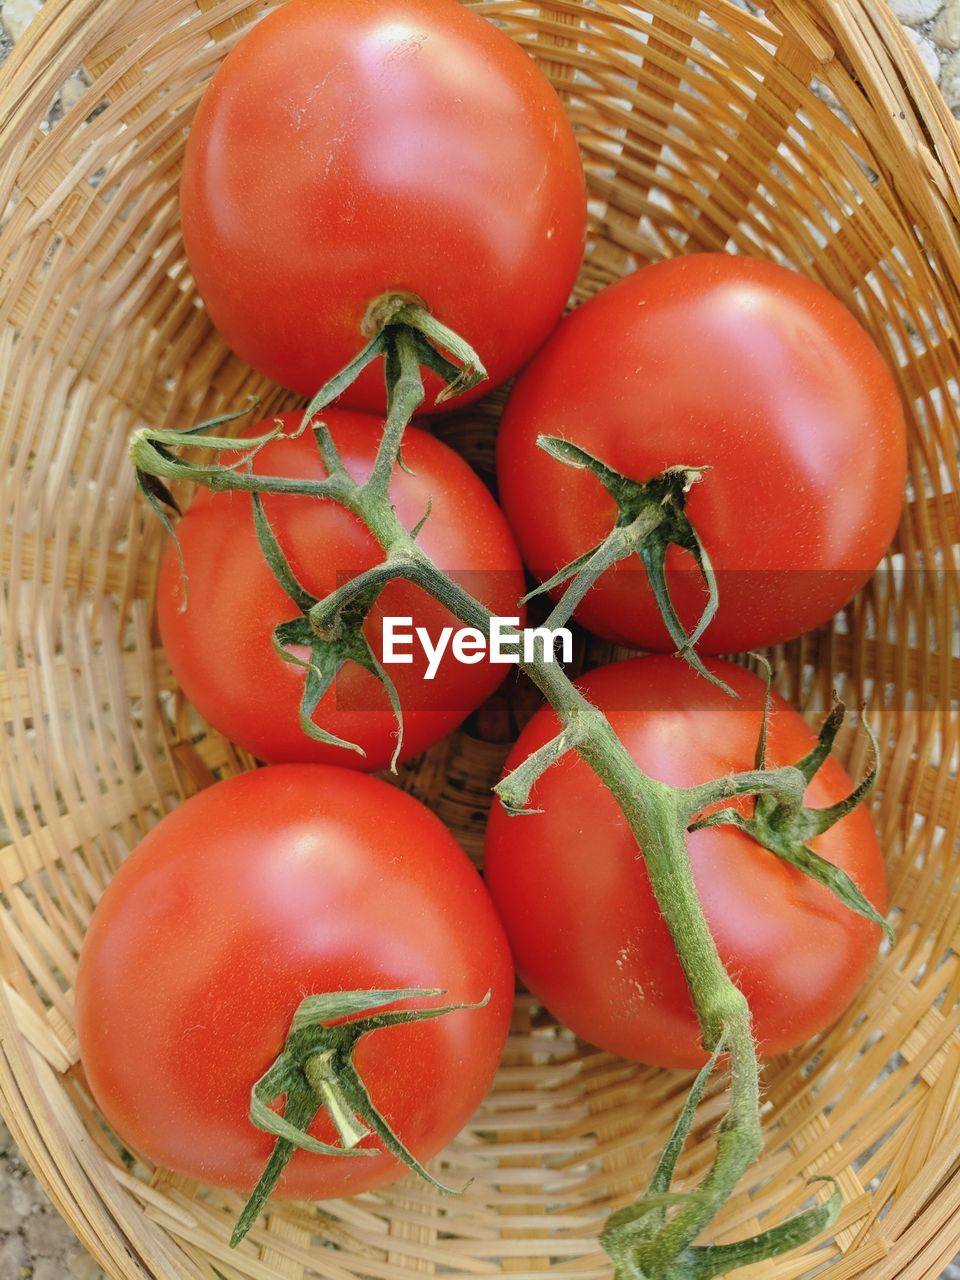 HIGH ANGLE VIEW OF TOMATOES IN WICKER BASKET